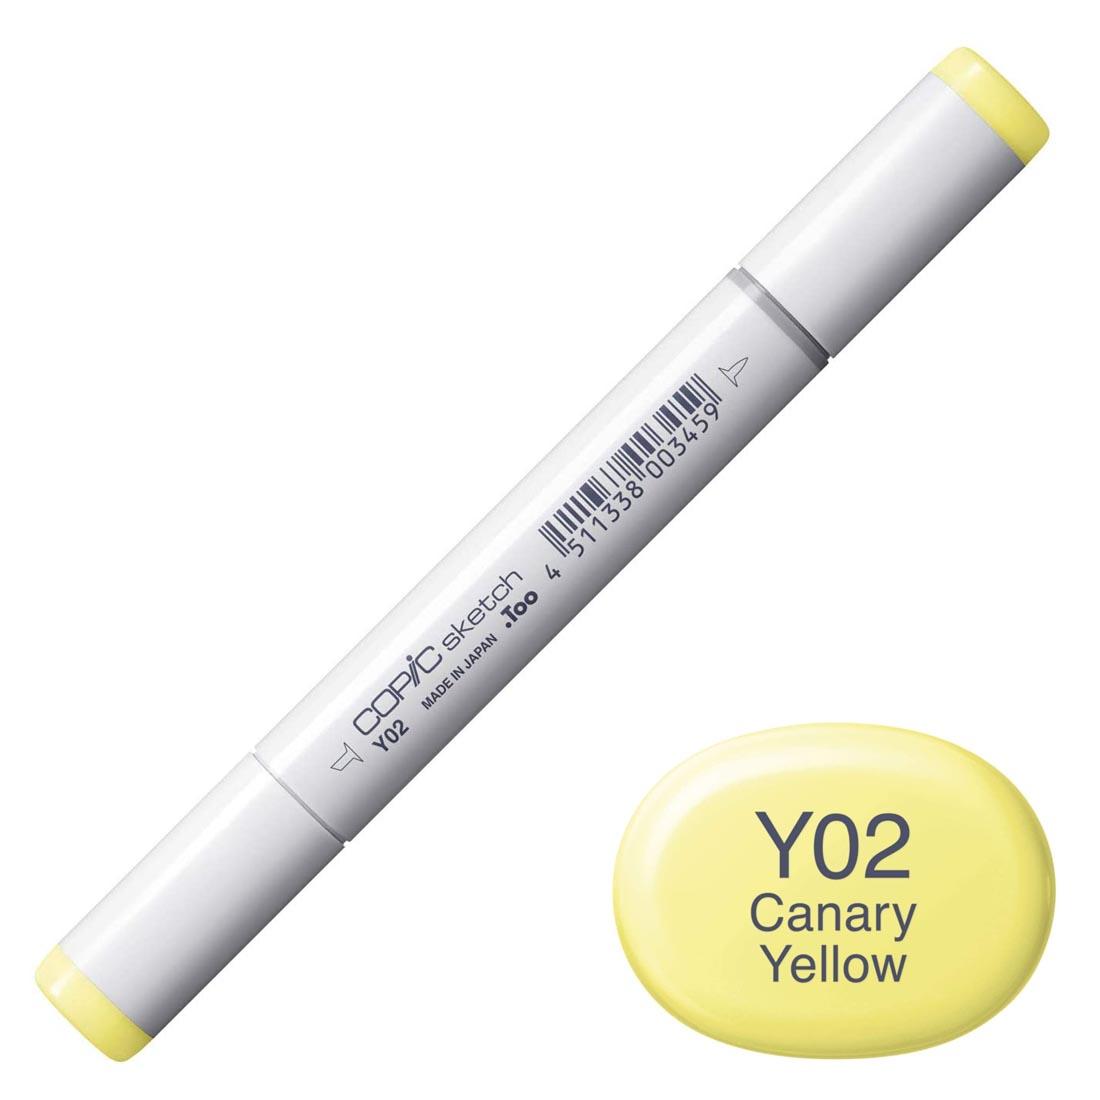 COPIC Sketch Marker with a color swatch and text of Y02 Canary Yellow